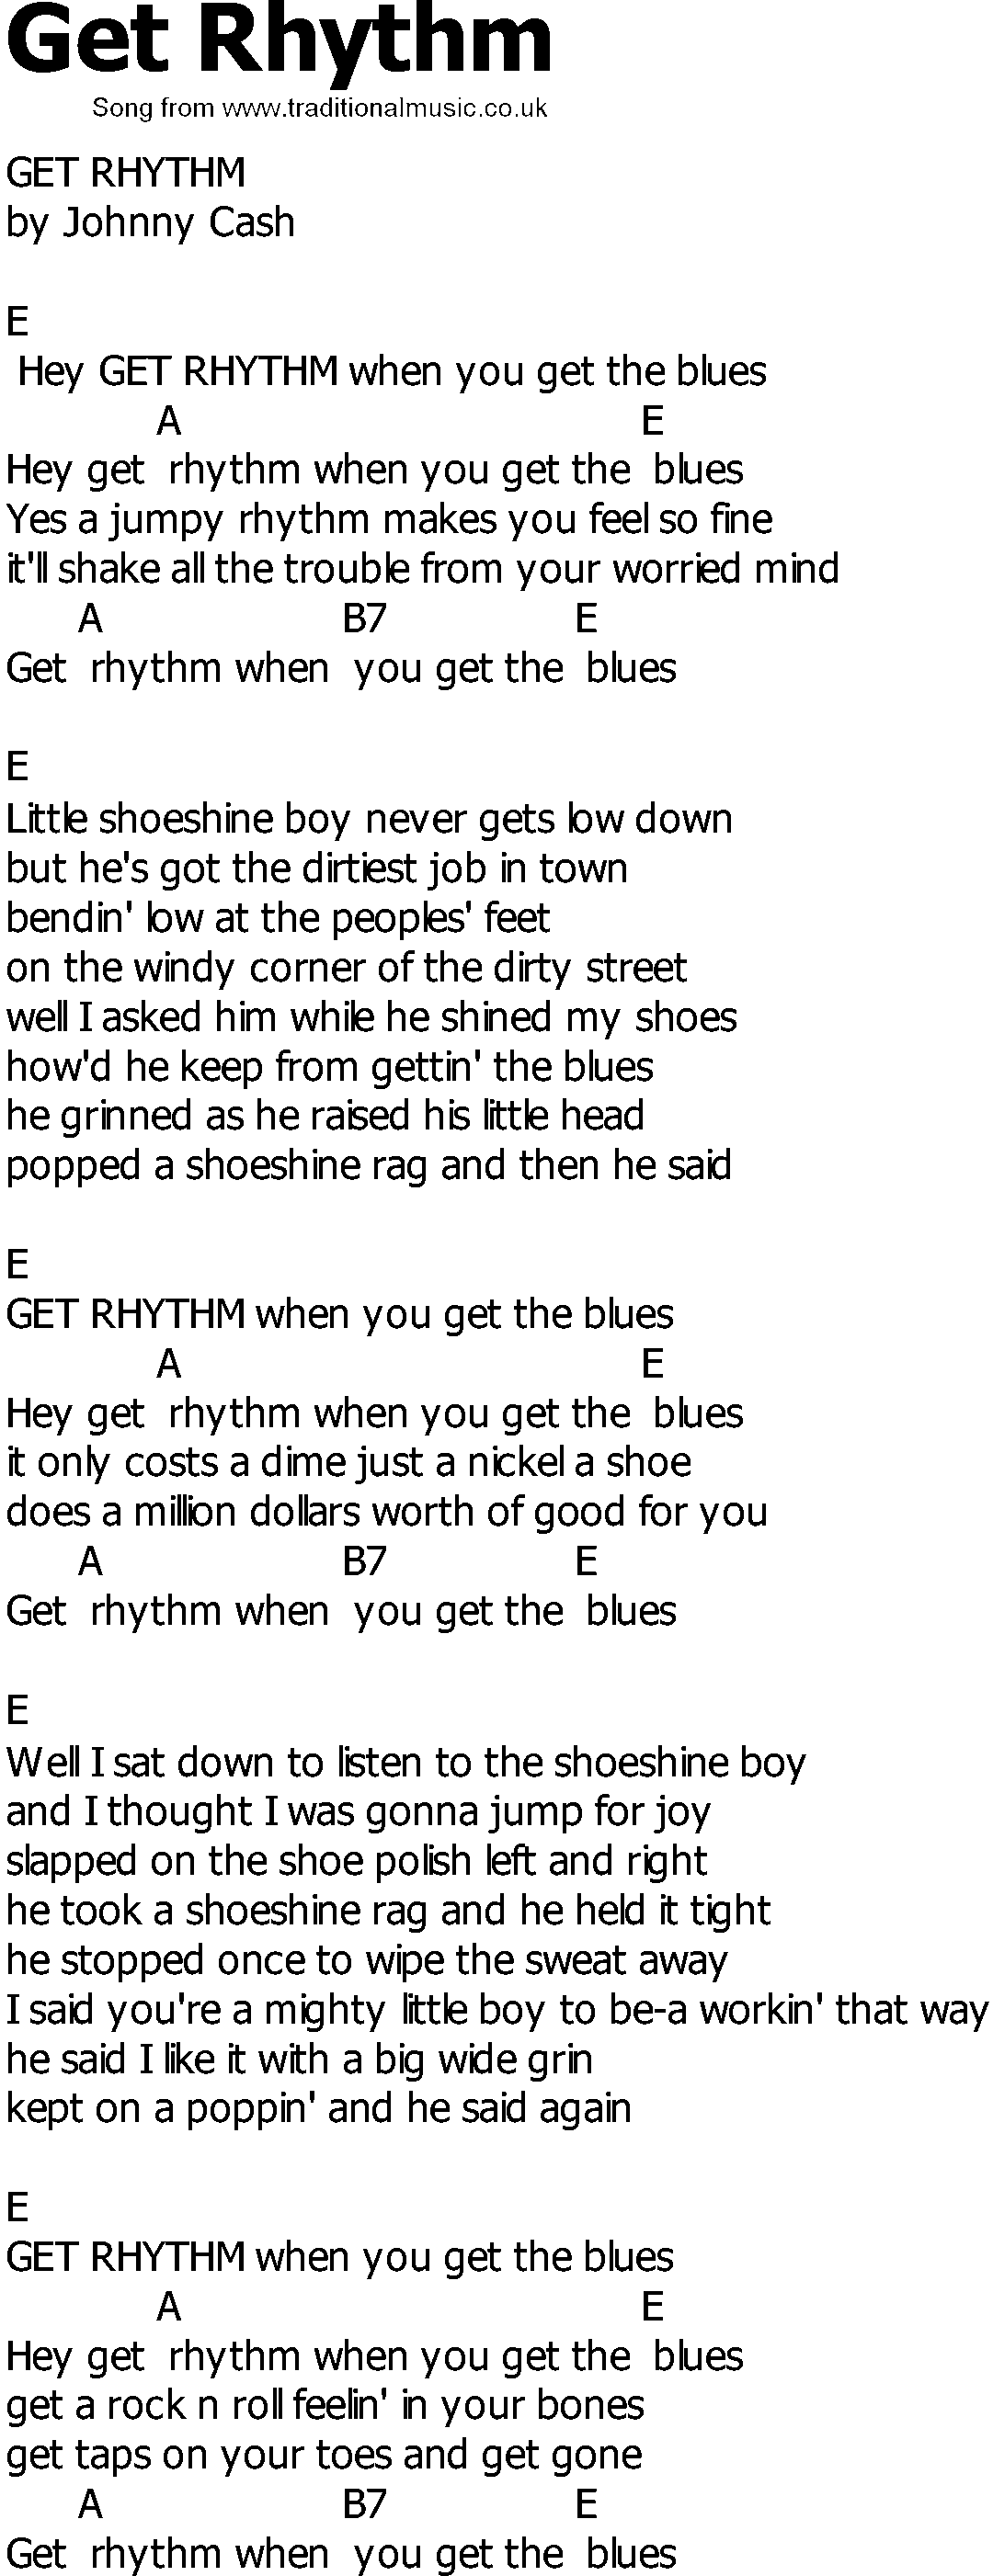 Old Country song lyrics with chords - Get Rhythm